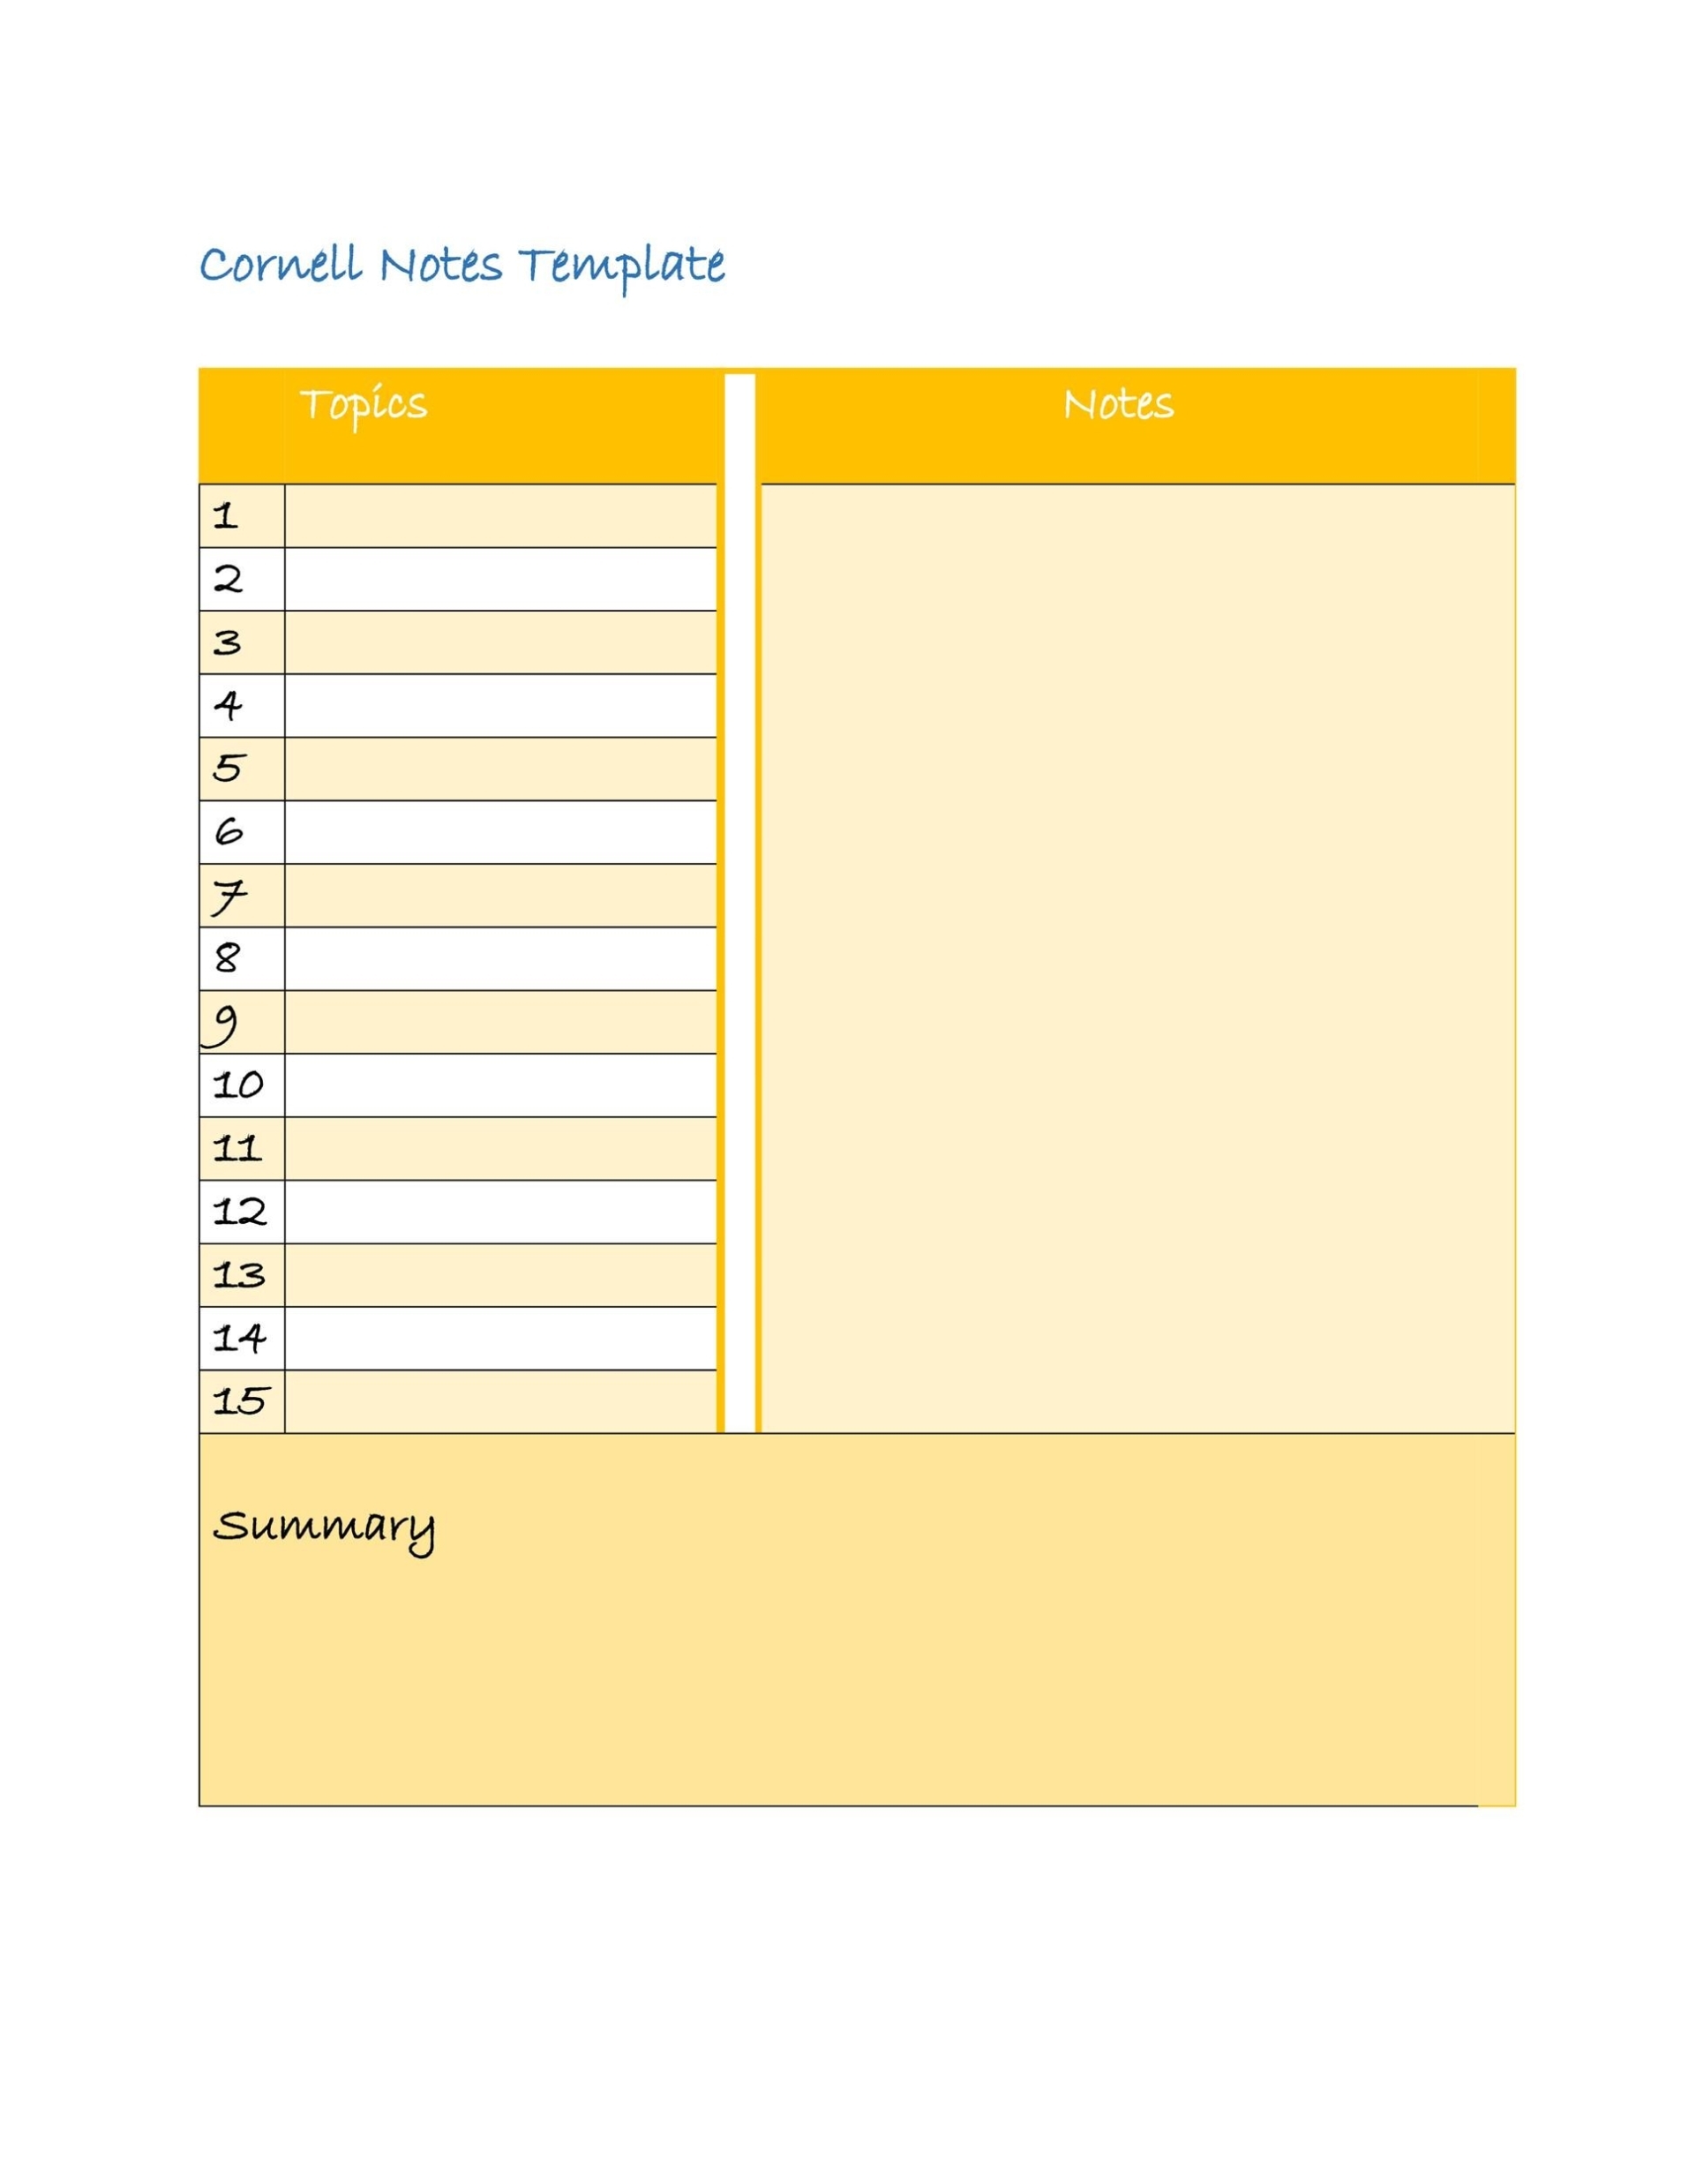 37 Cornell Notes Templates & Examples [Word, Excel, Pdf] ᐅ Regarding Lecture Notes Template Word